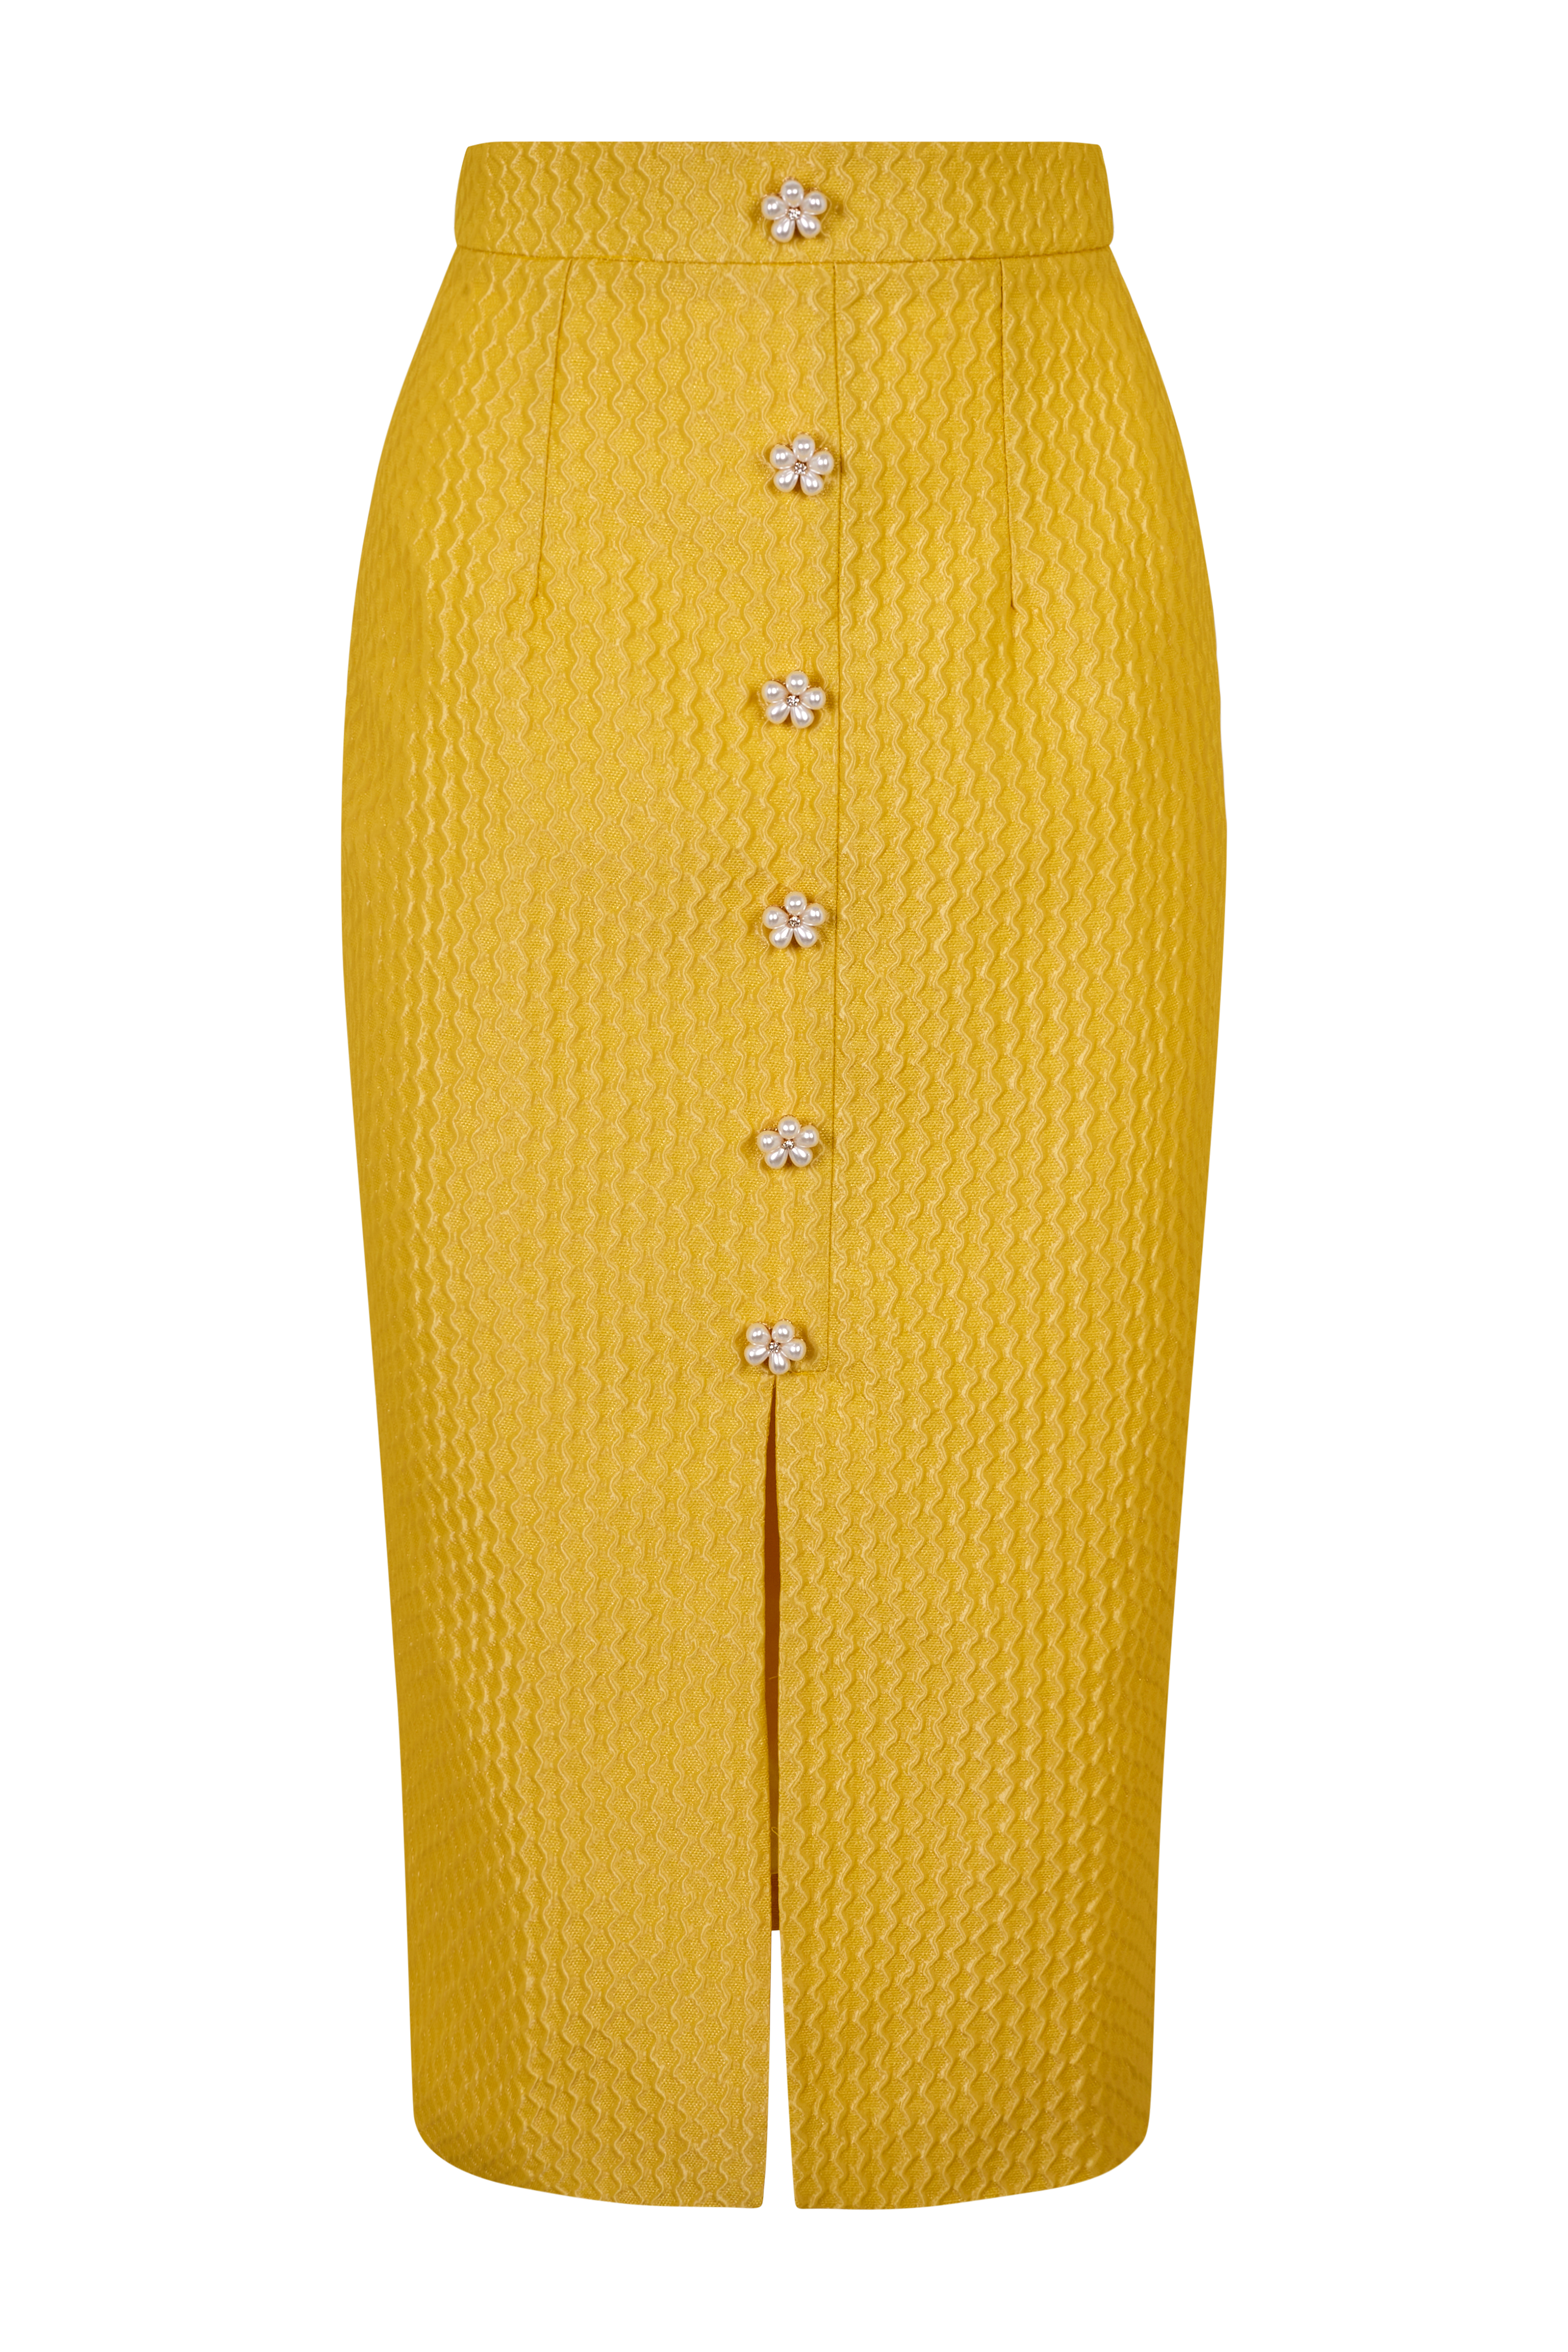 Nº04 MIDI SKIRT WITH FLOWER JEWEL BUTTONS |  Wedding Collection